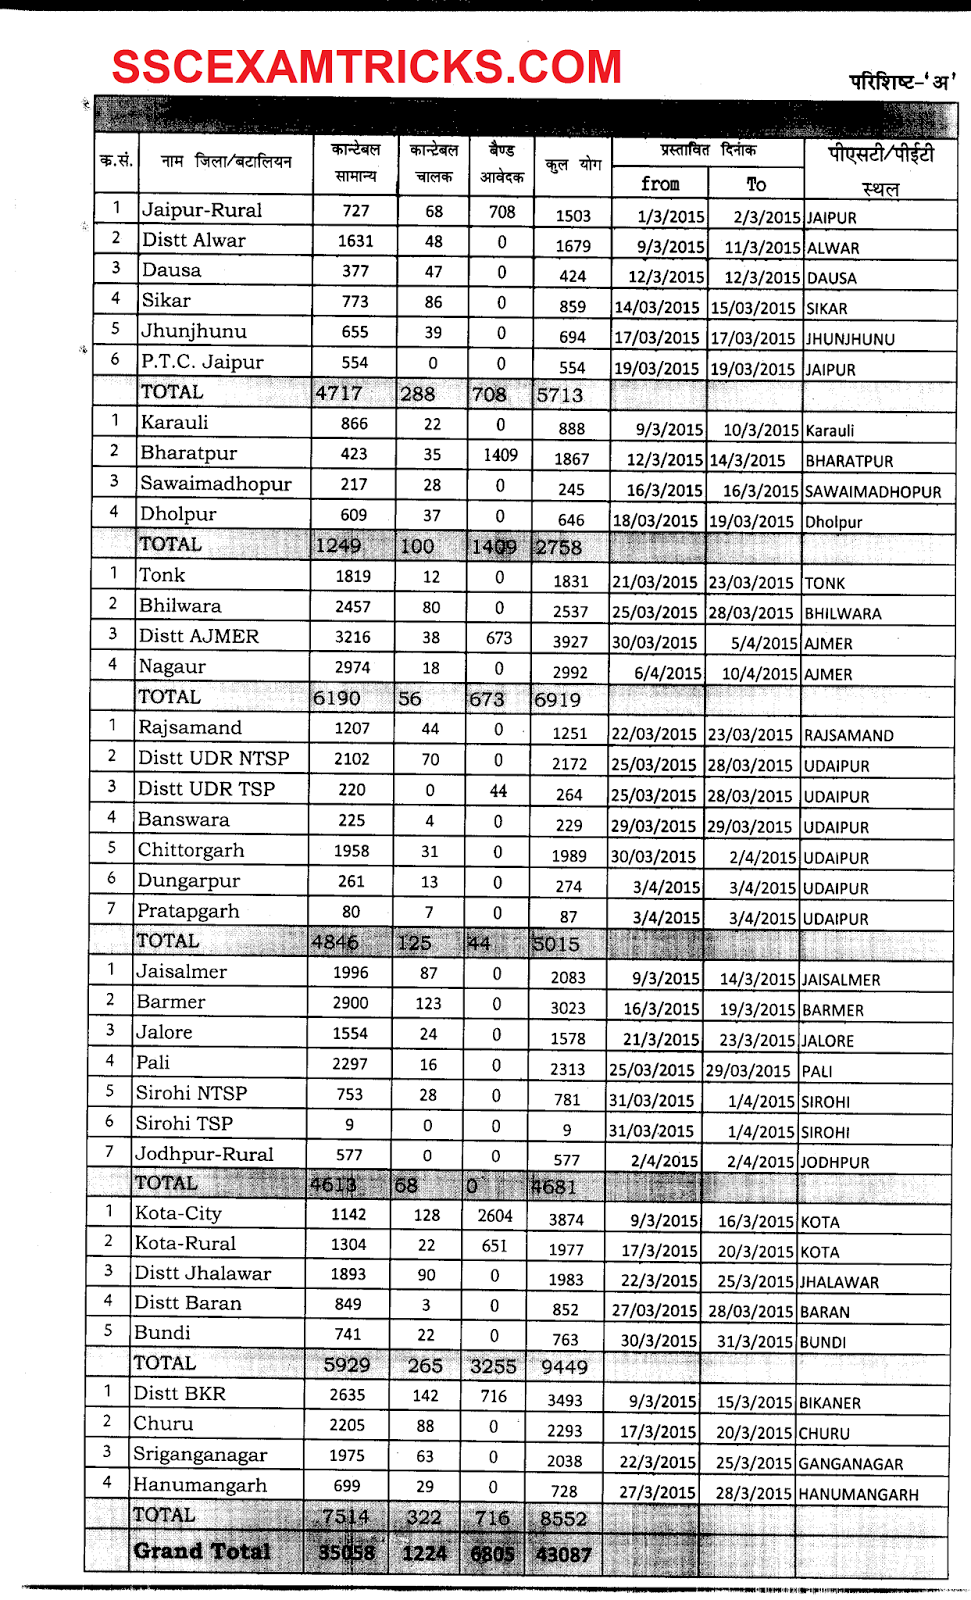 RAJASTHAN POLICE PET/PST SCHEDULE 2015